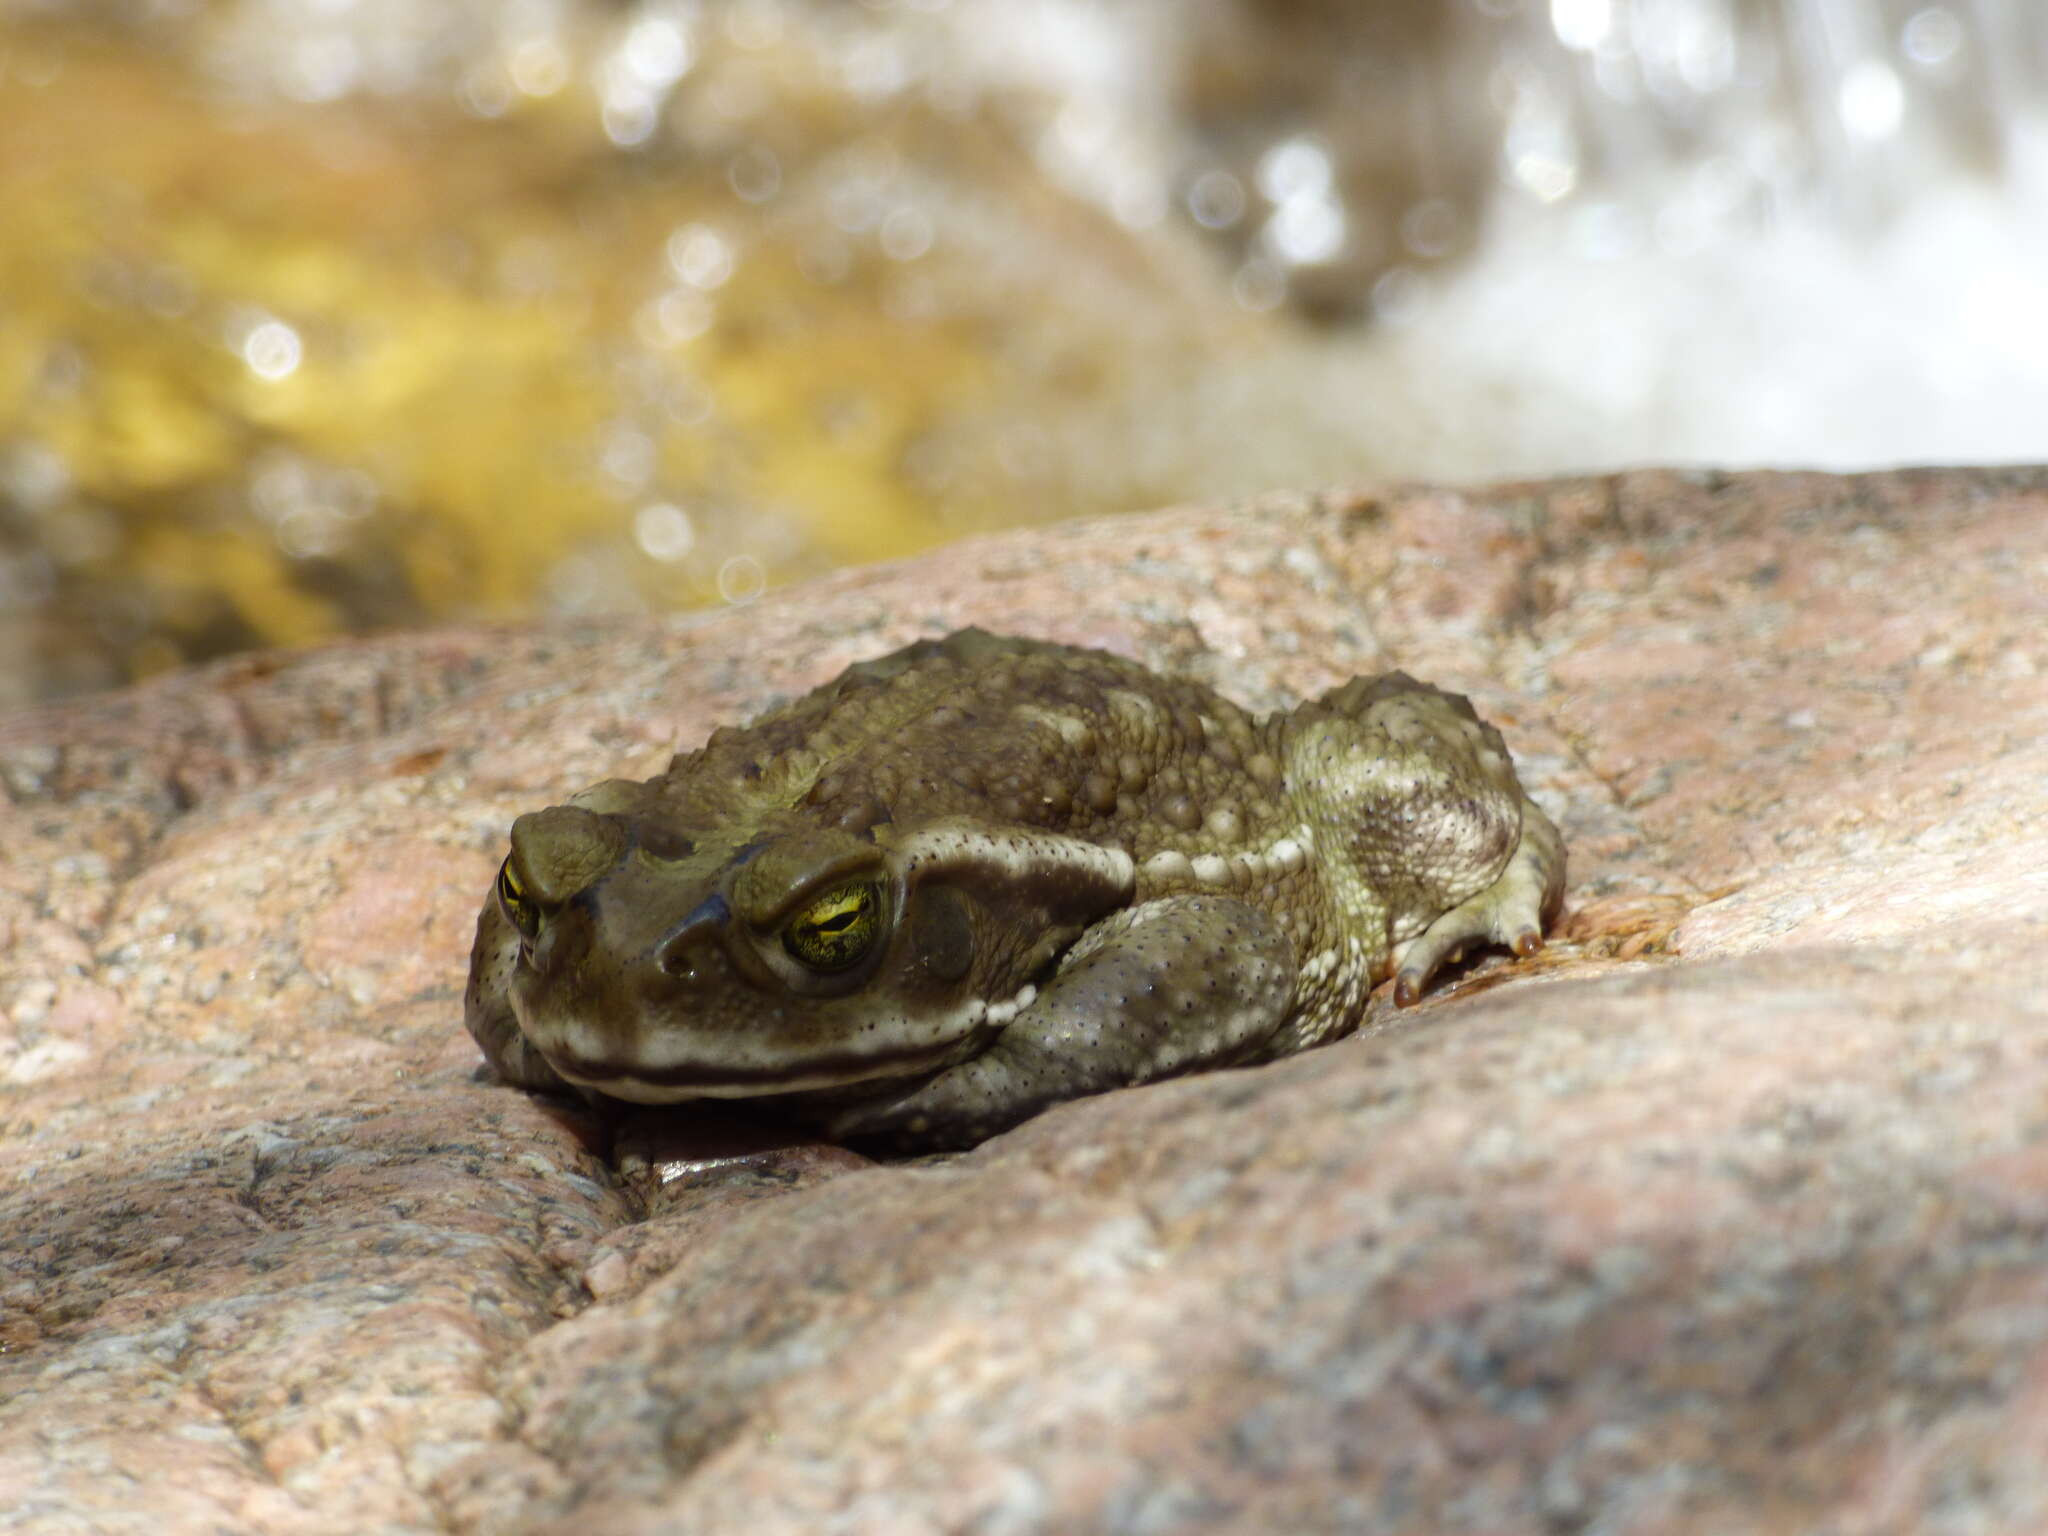 Image of Argentine toad